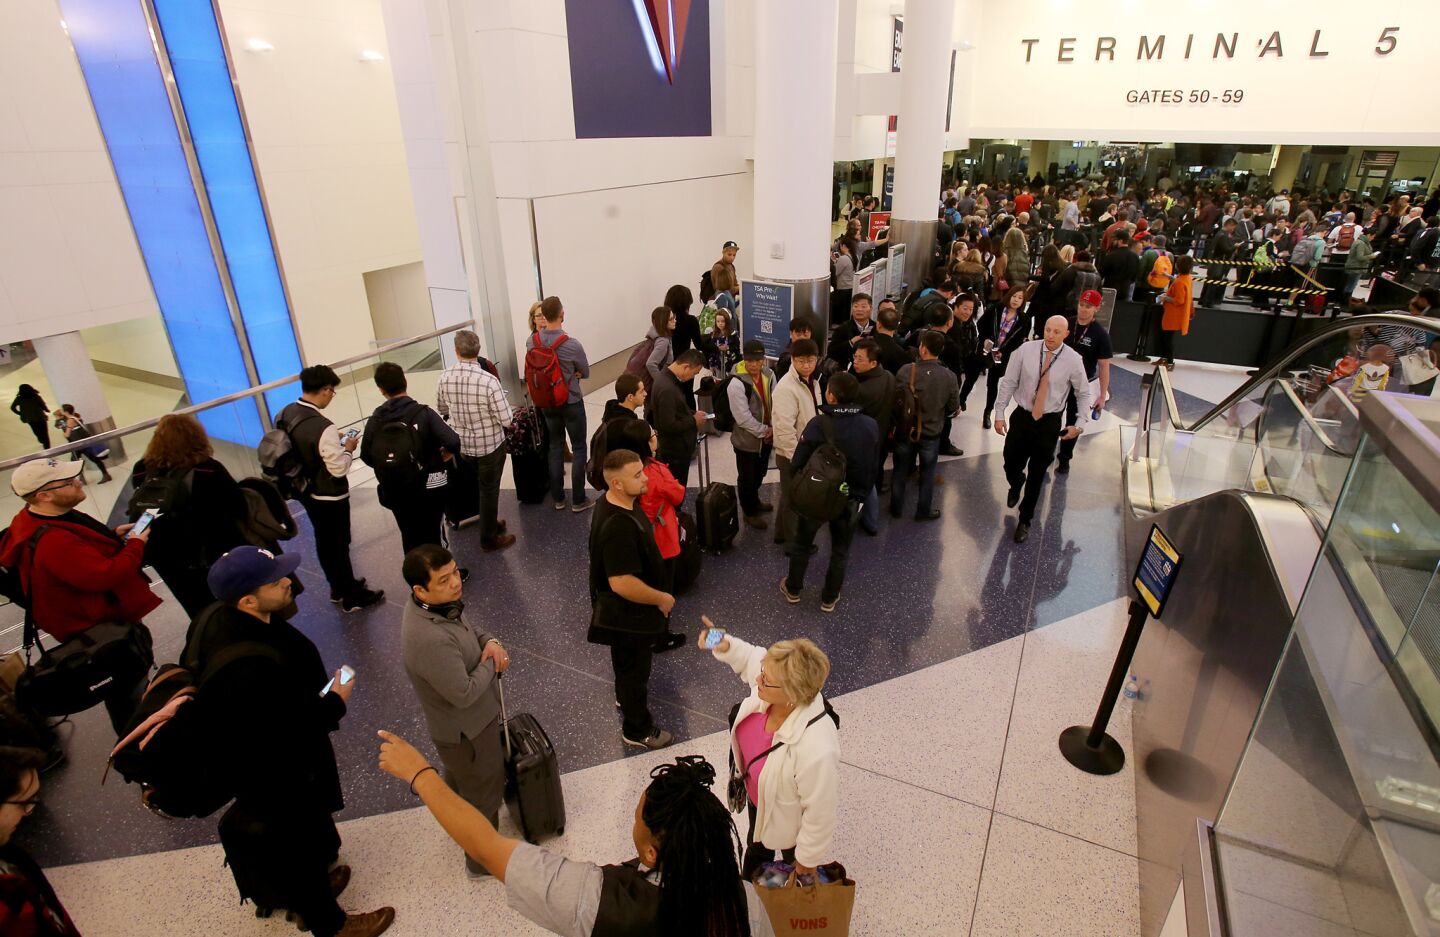 Security screening lines in Terminal 5 at LAX back up after unattended baggage was found in a restroom on Wednesday.